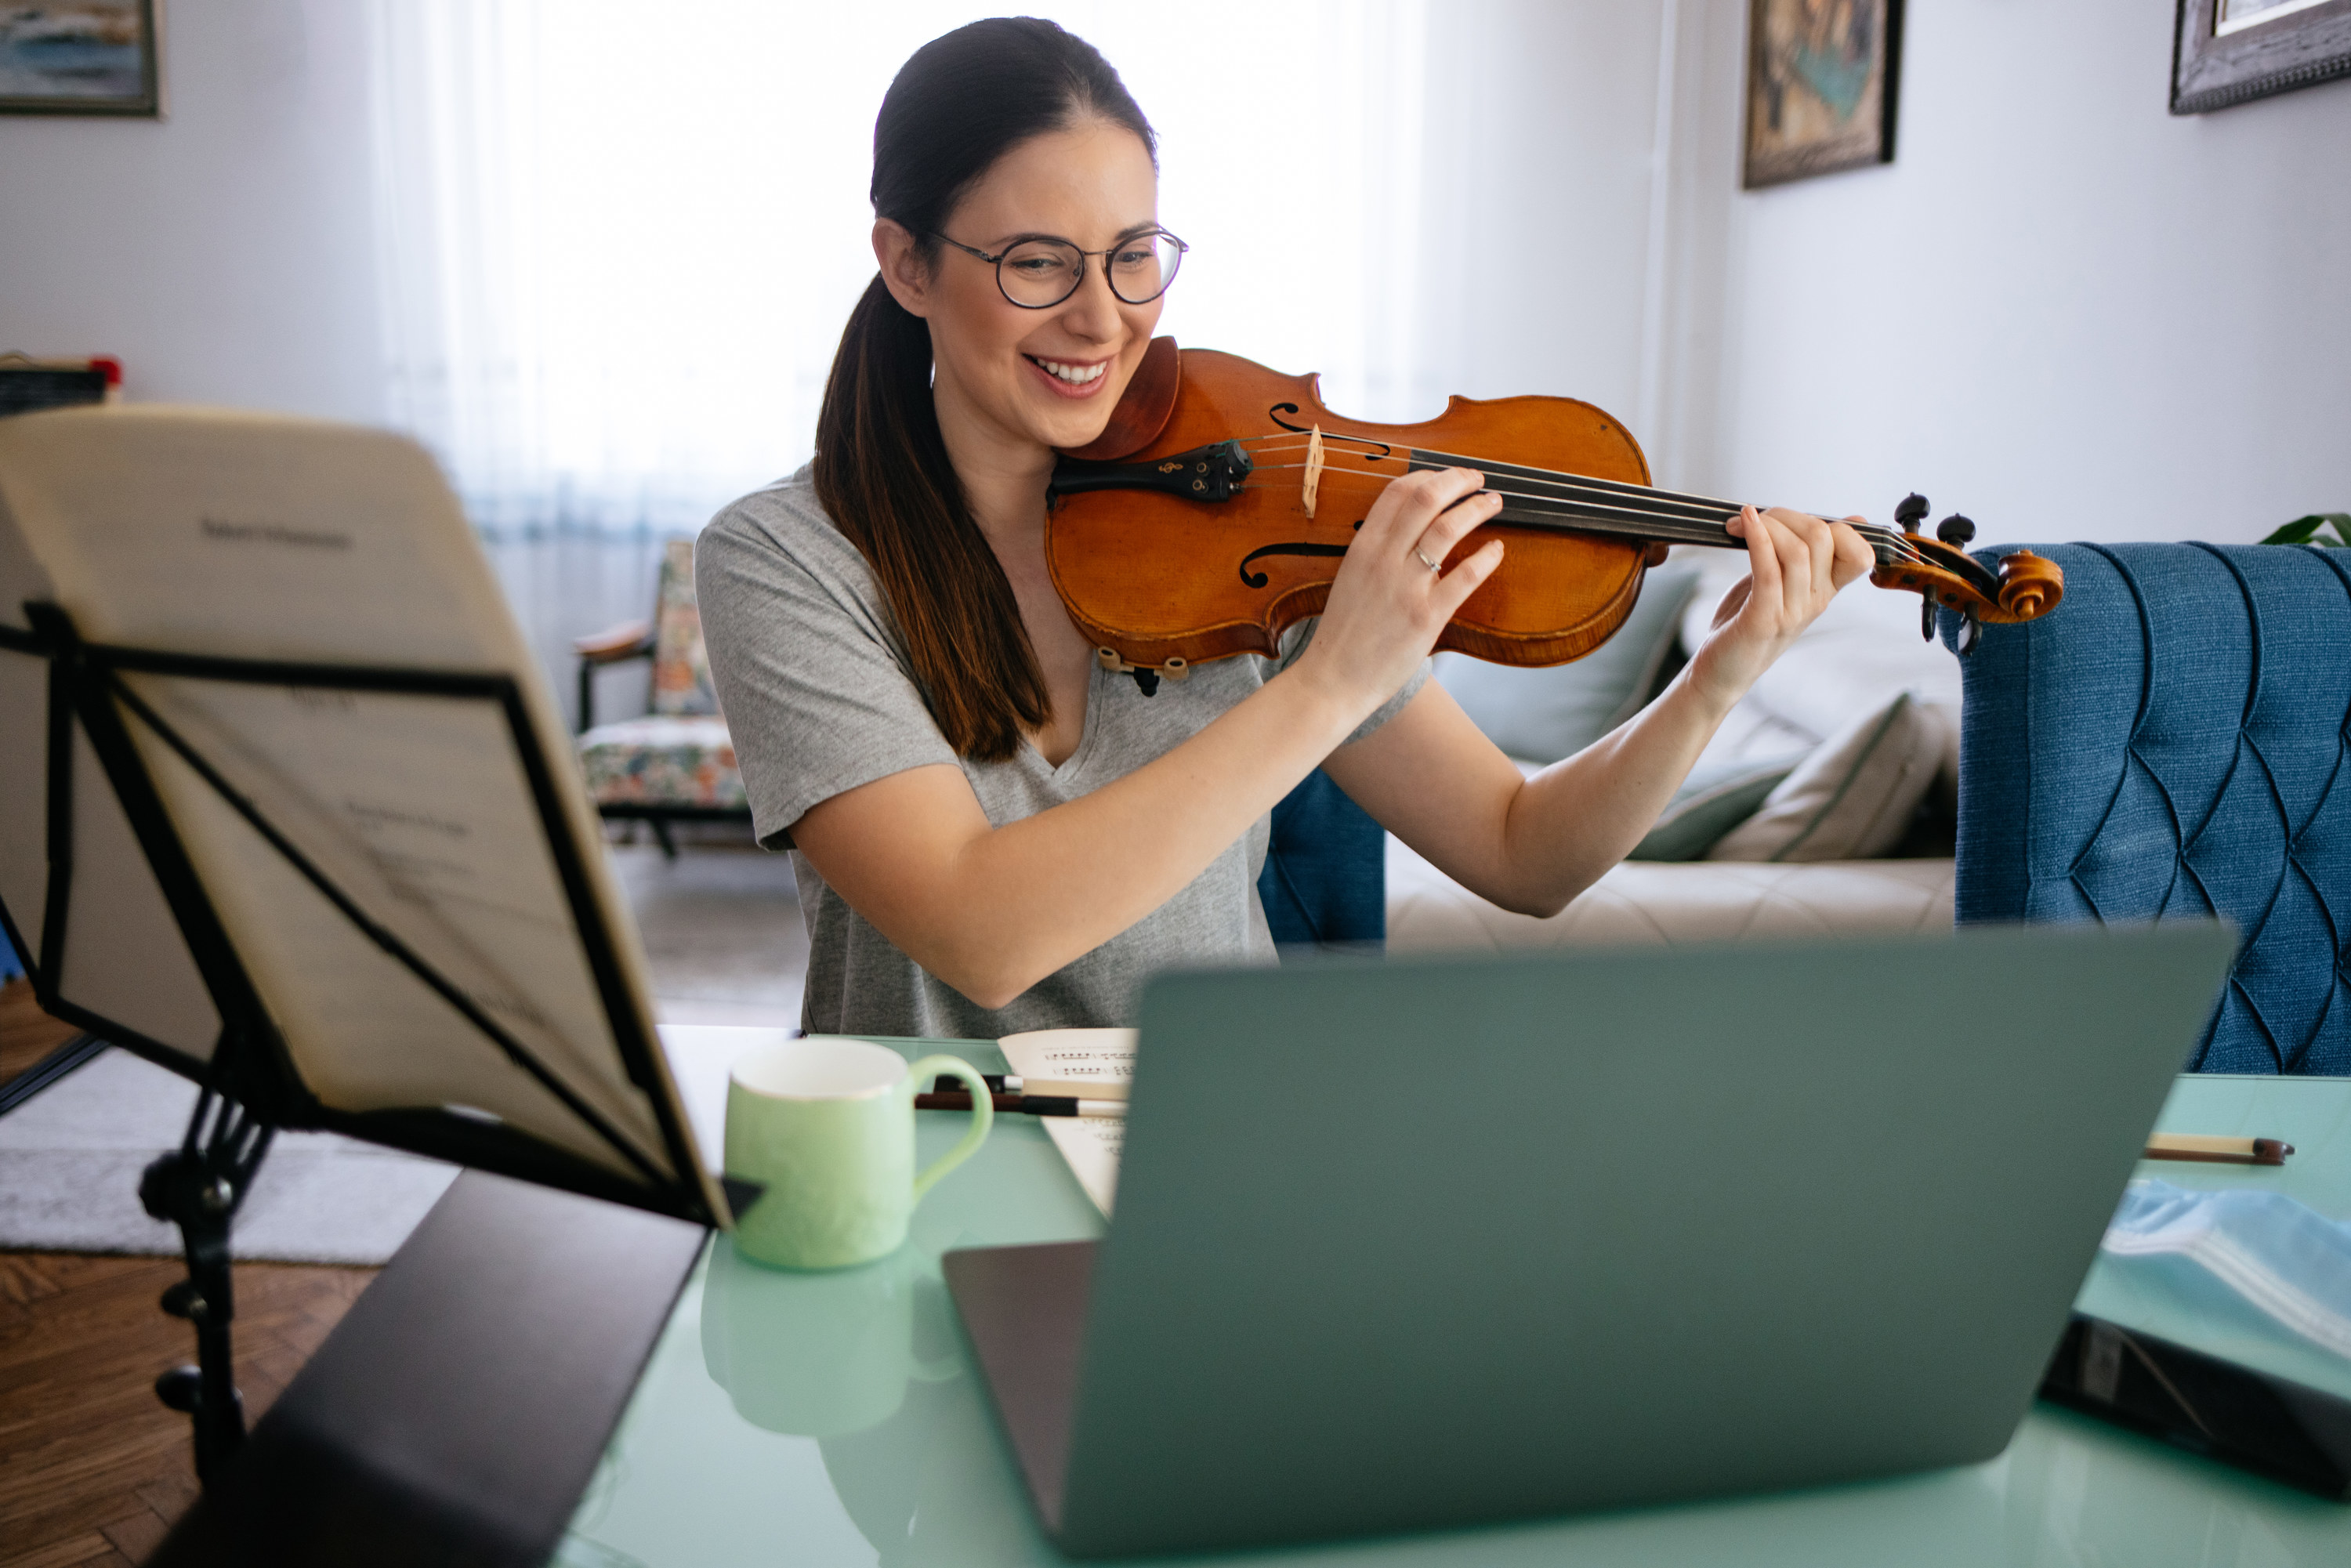 Woman smiles, while playing the violin in front of her laptop